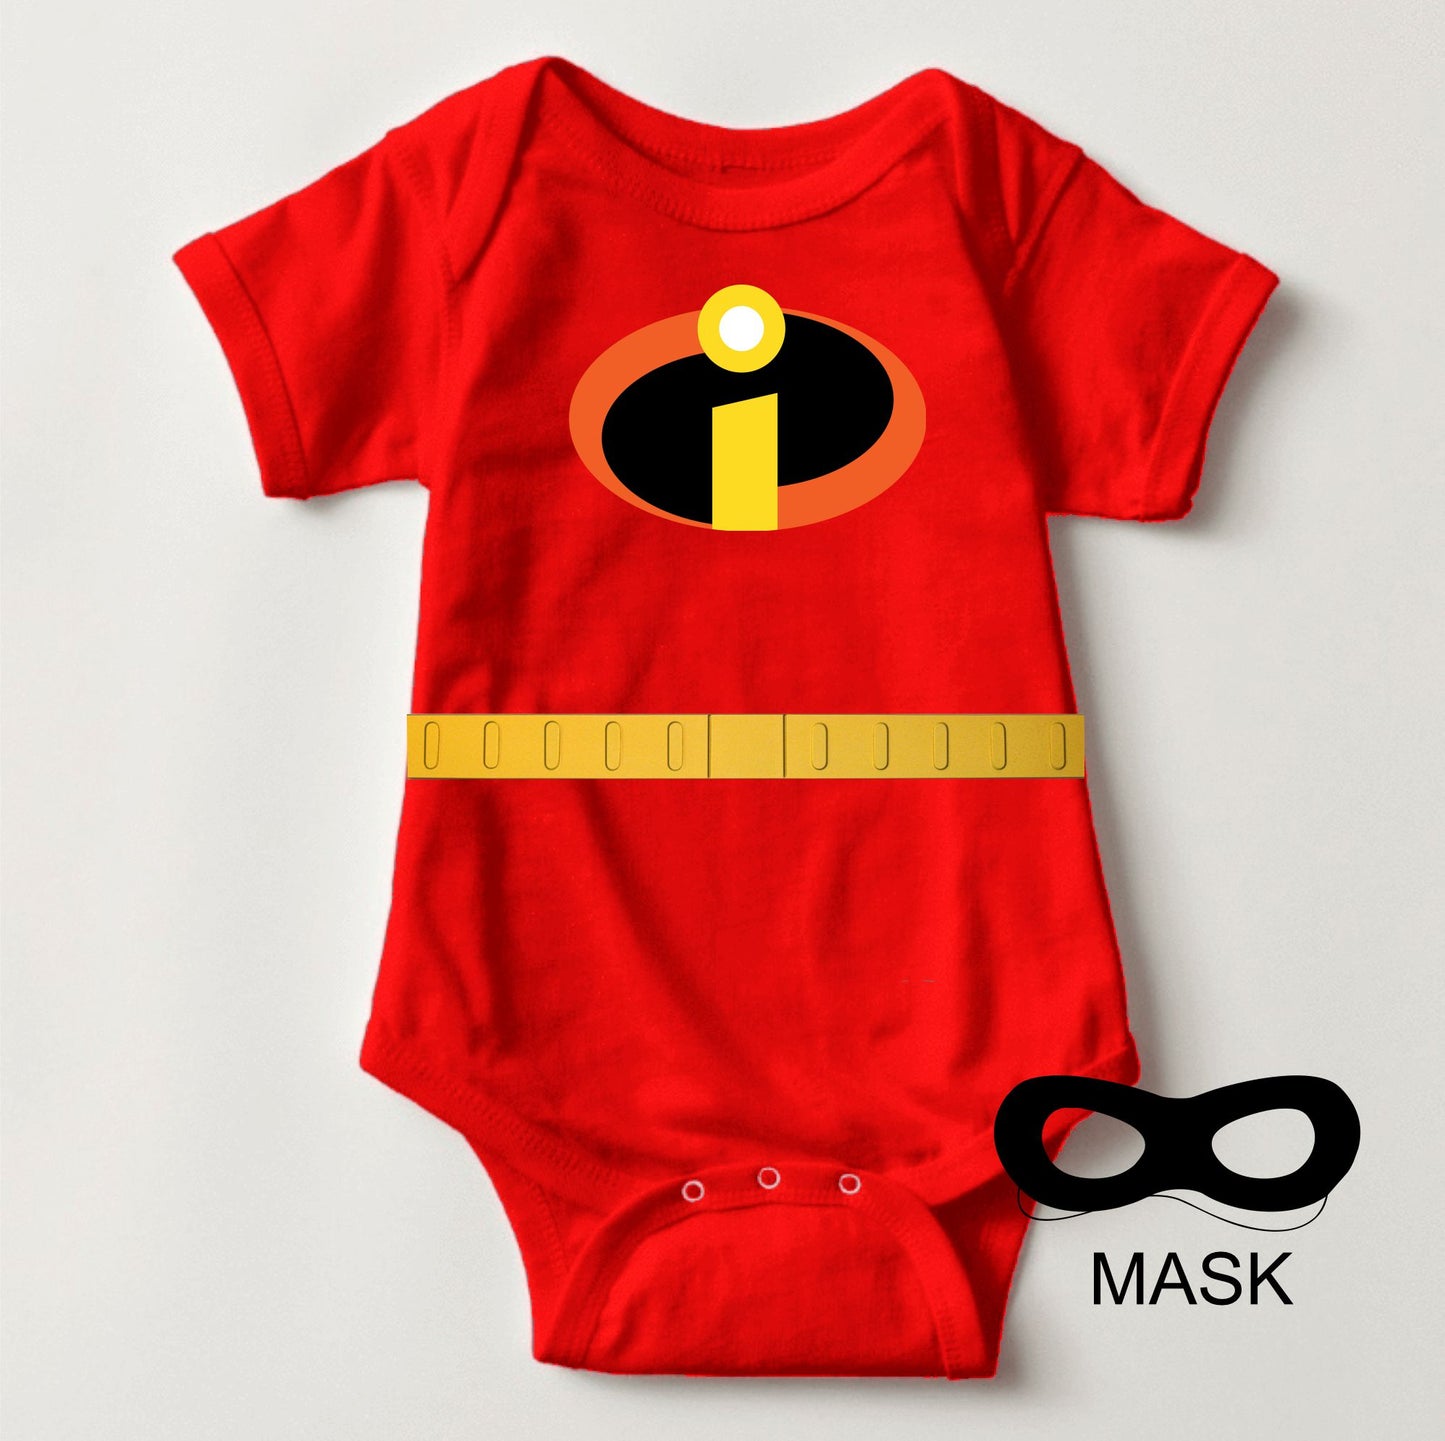 Baby Superhero Onesies - The Incredibles with Mask